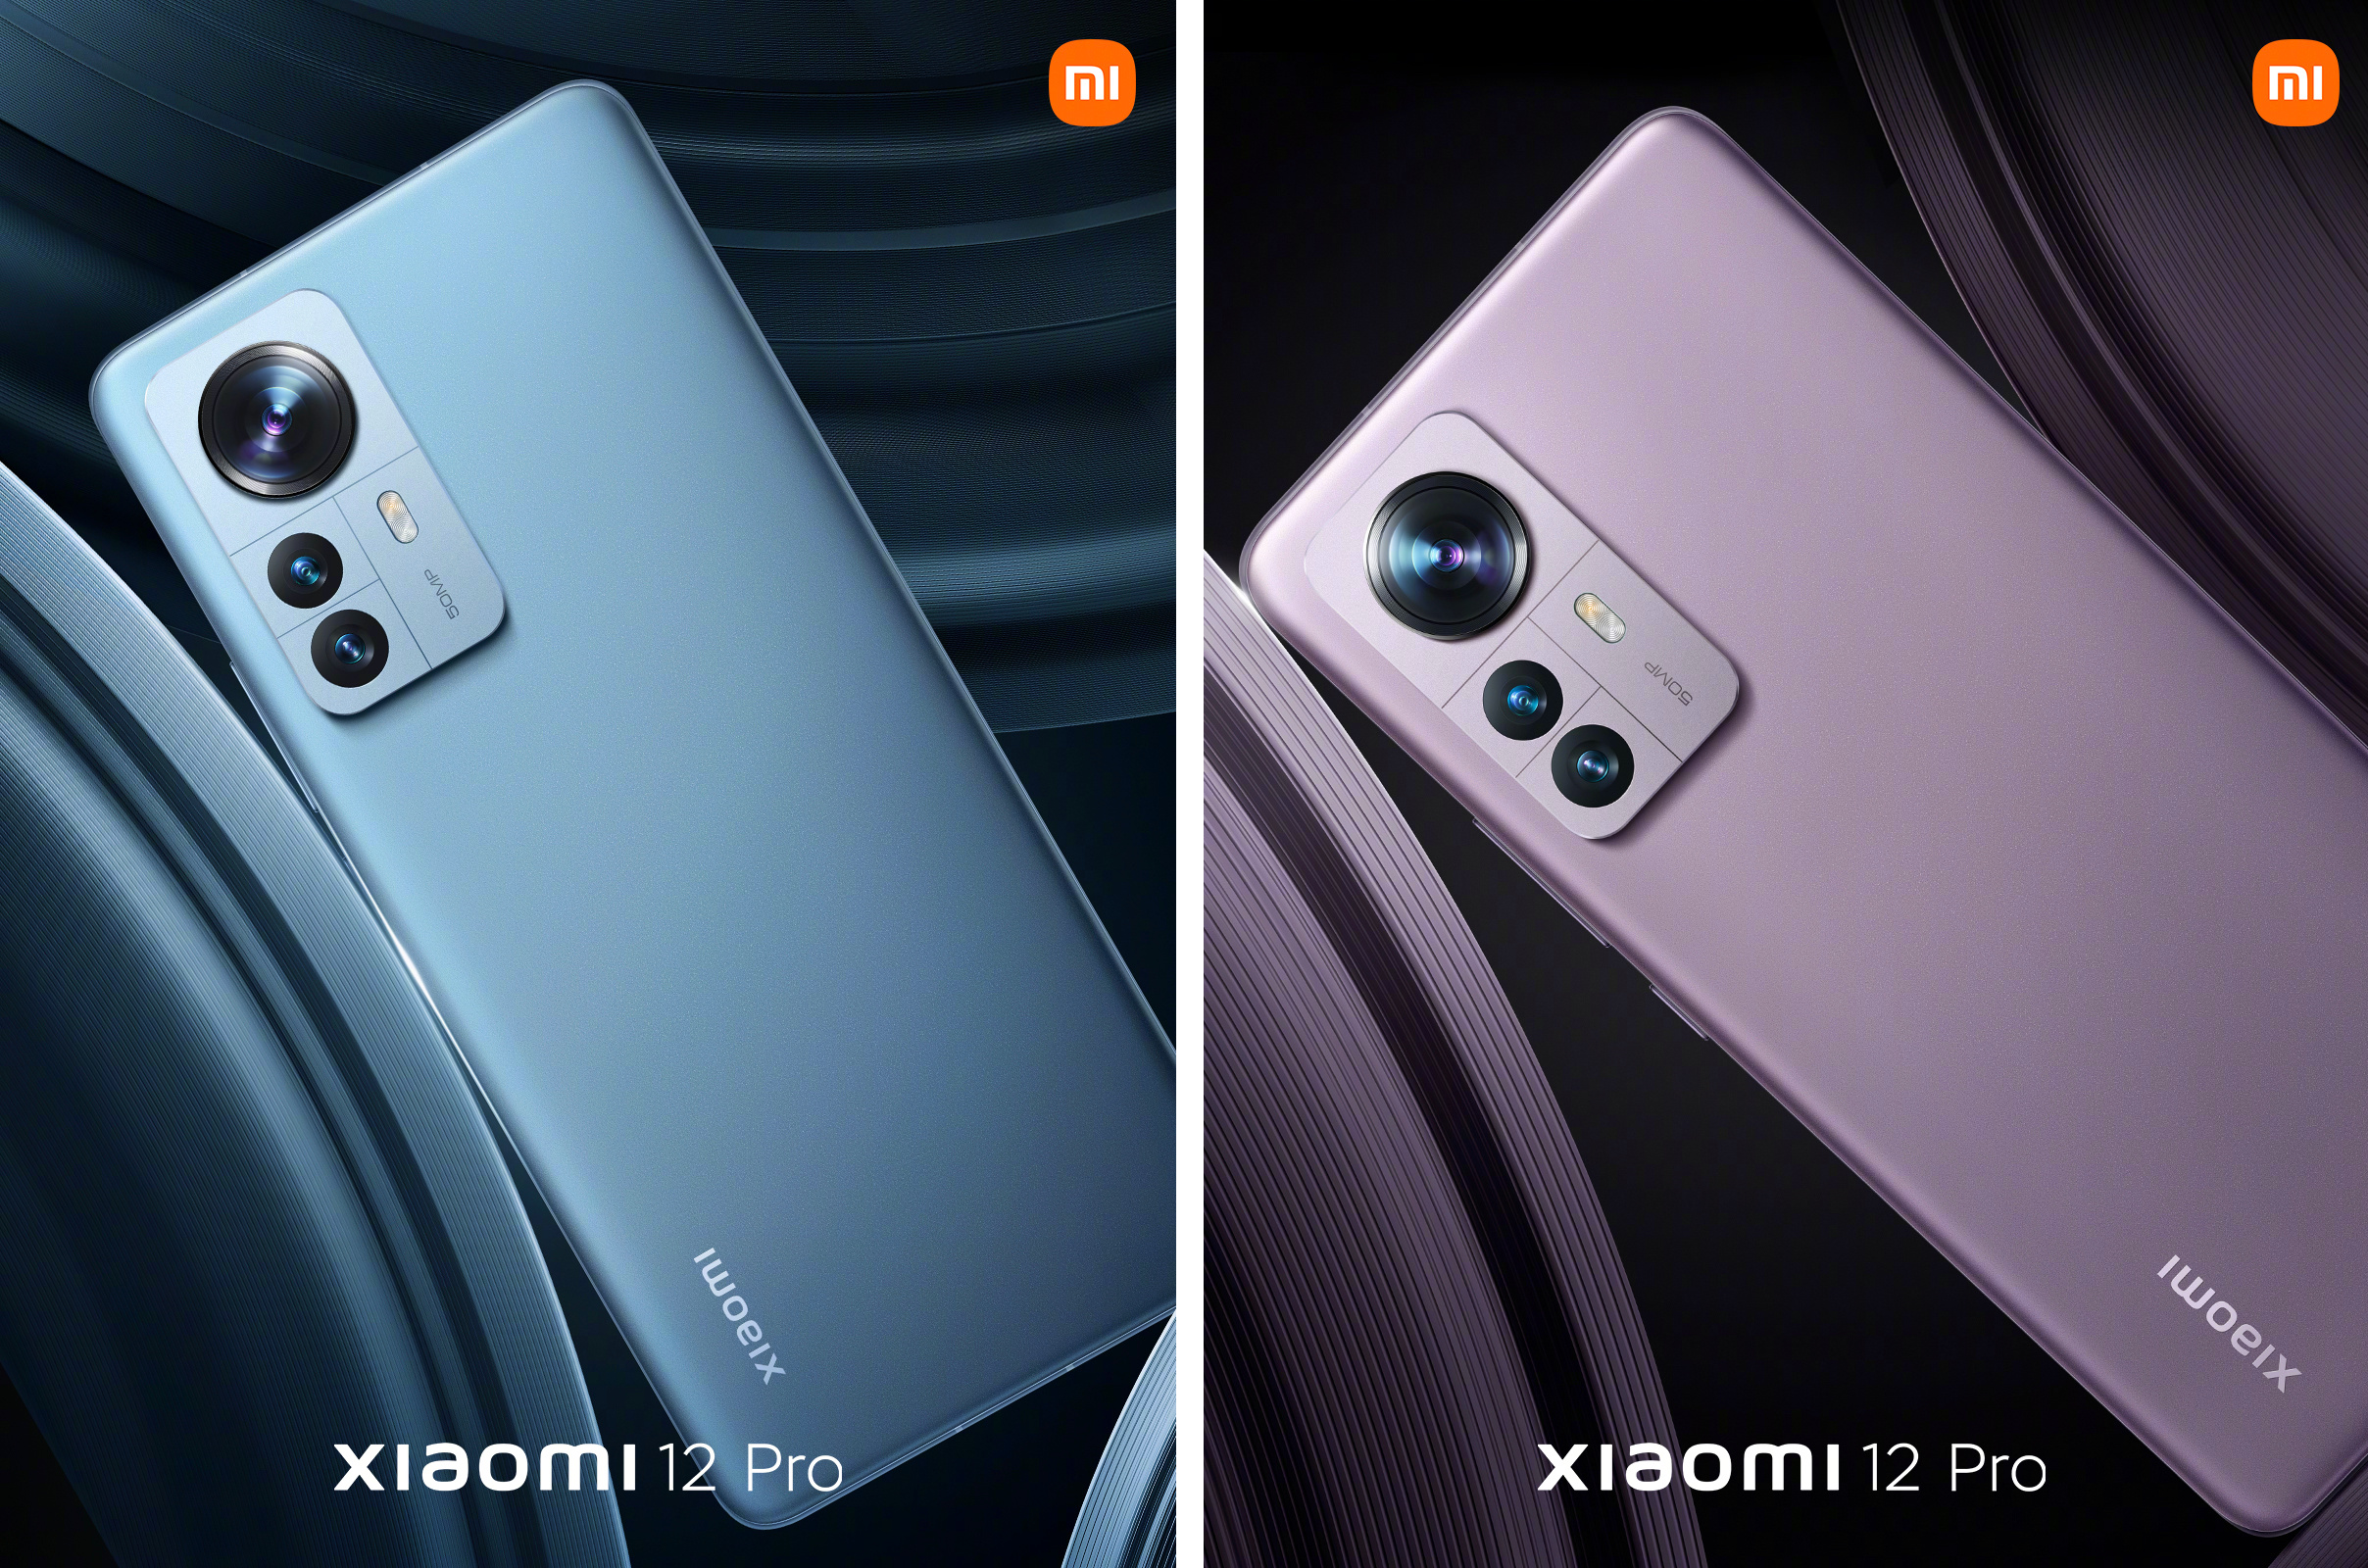 Xiaomi 12 Pro - Snapdragon 8 Gen1, triple 50MP cameras, 120W charging and best display ever starting at $ 740